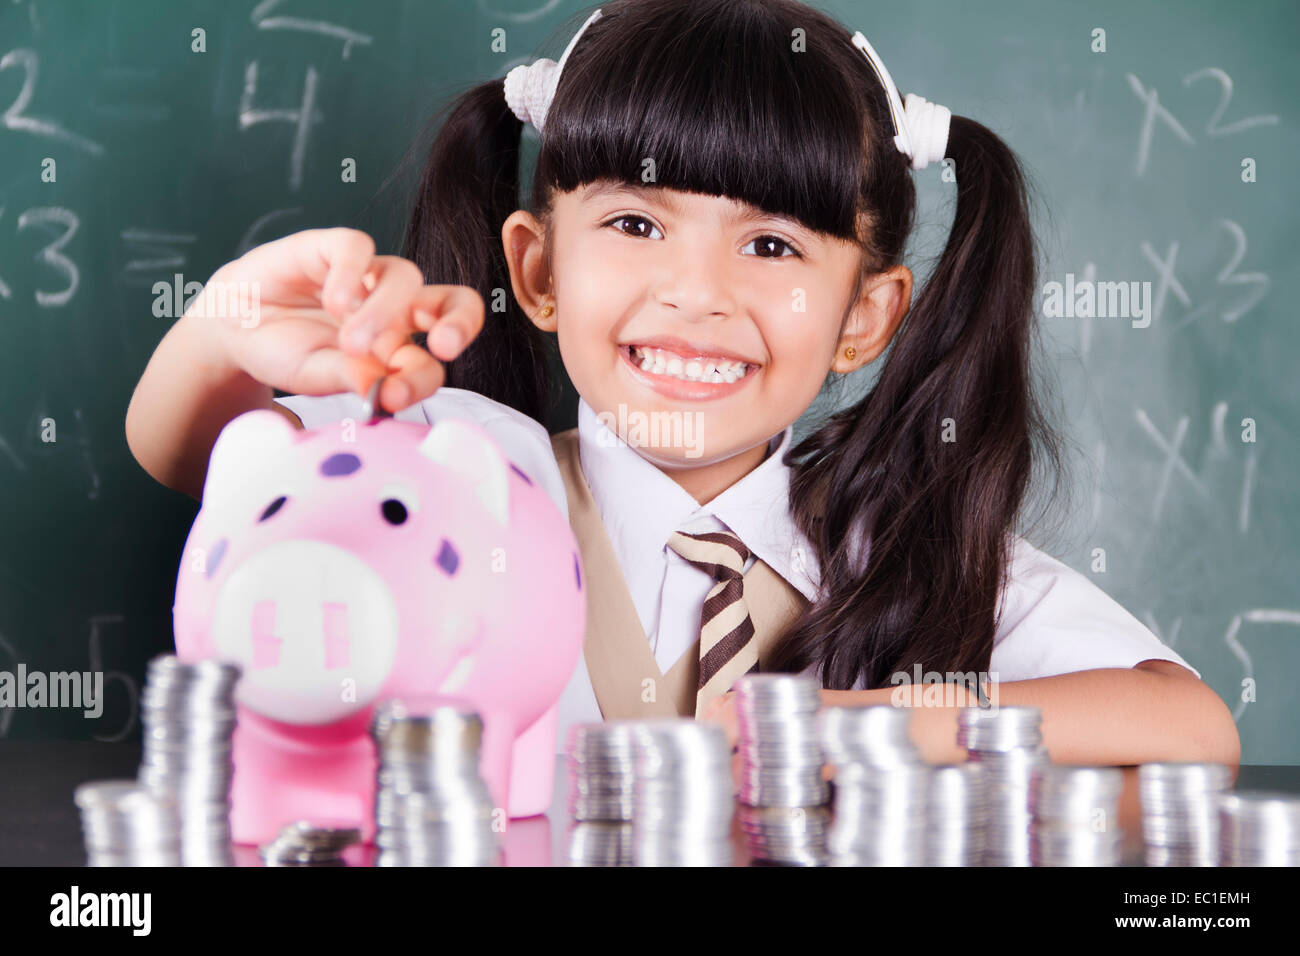 indian Beautiful child Student with Money Stock Photo